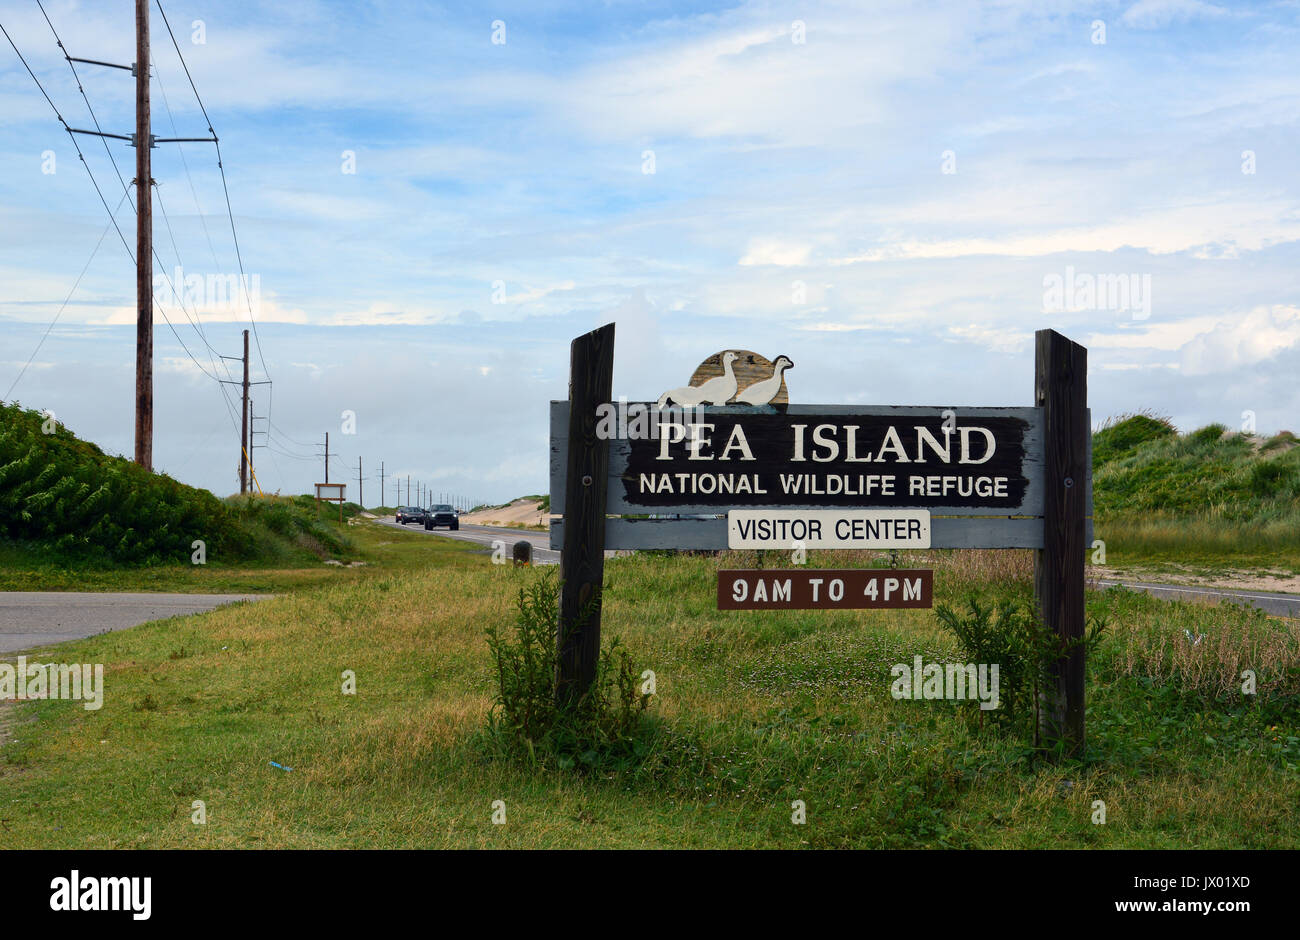 The Pea Island Wildlife Refuge was established in 1938 and provides a protected habitat for native animals on the Outer Banks of North Carolina. Stock Photo